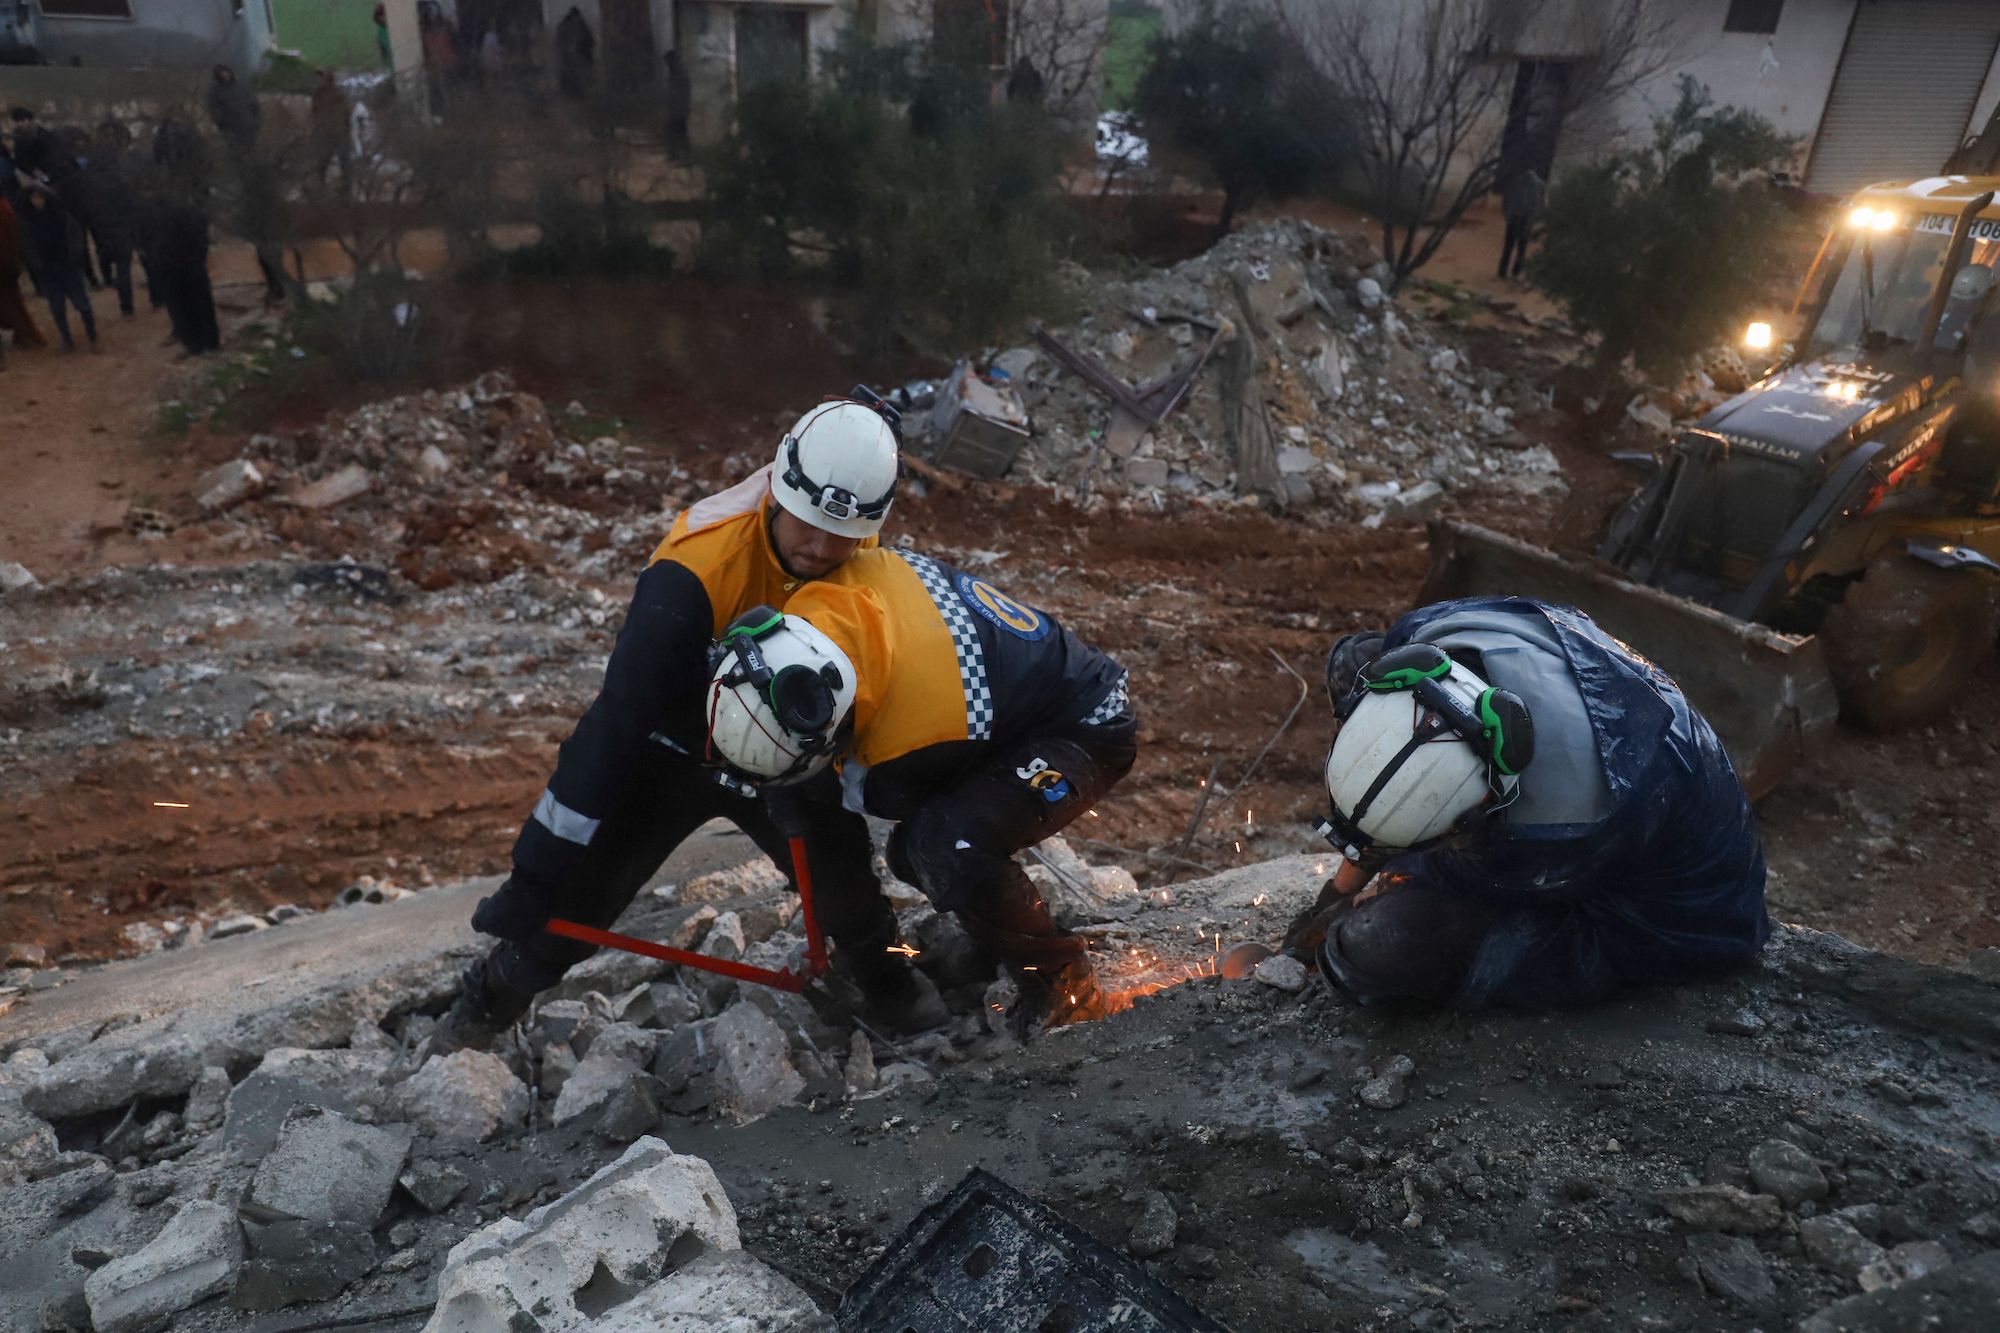 Members of the White Helmets search through rubble for survivors in the countryside of the northwestern Syrian Idlib province, early on Monday.